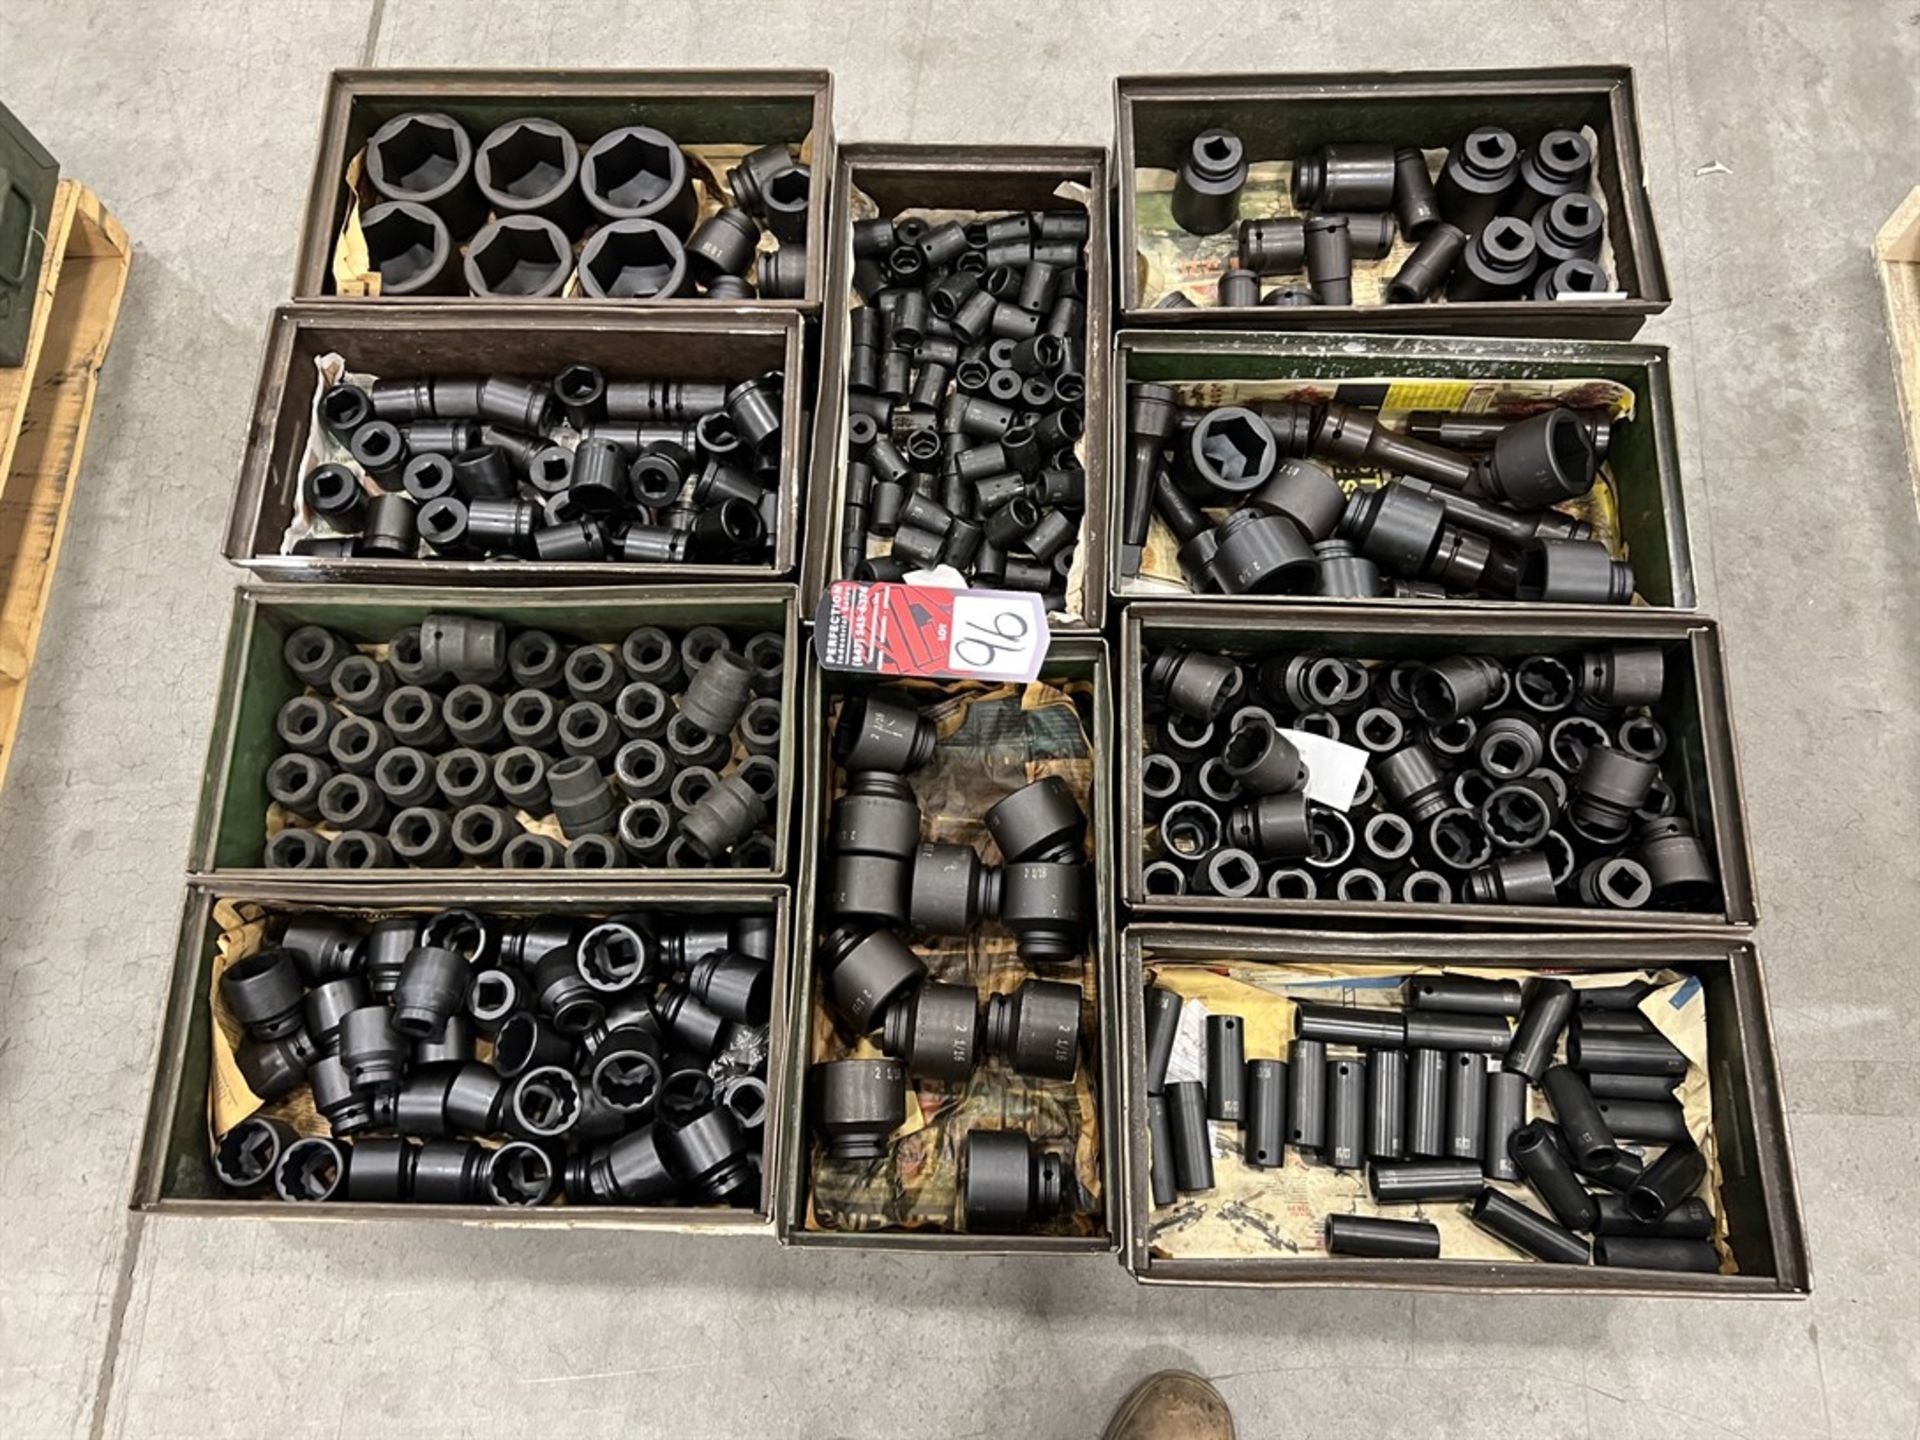 Pallet of 1/2", 3/4" and 1" Drive Impact Sockets up to 2-3/16"